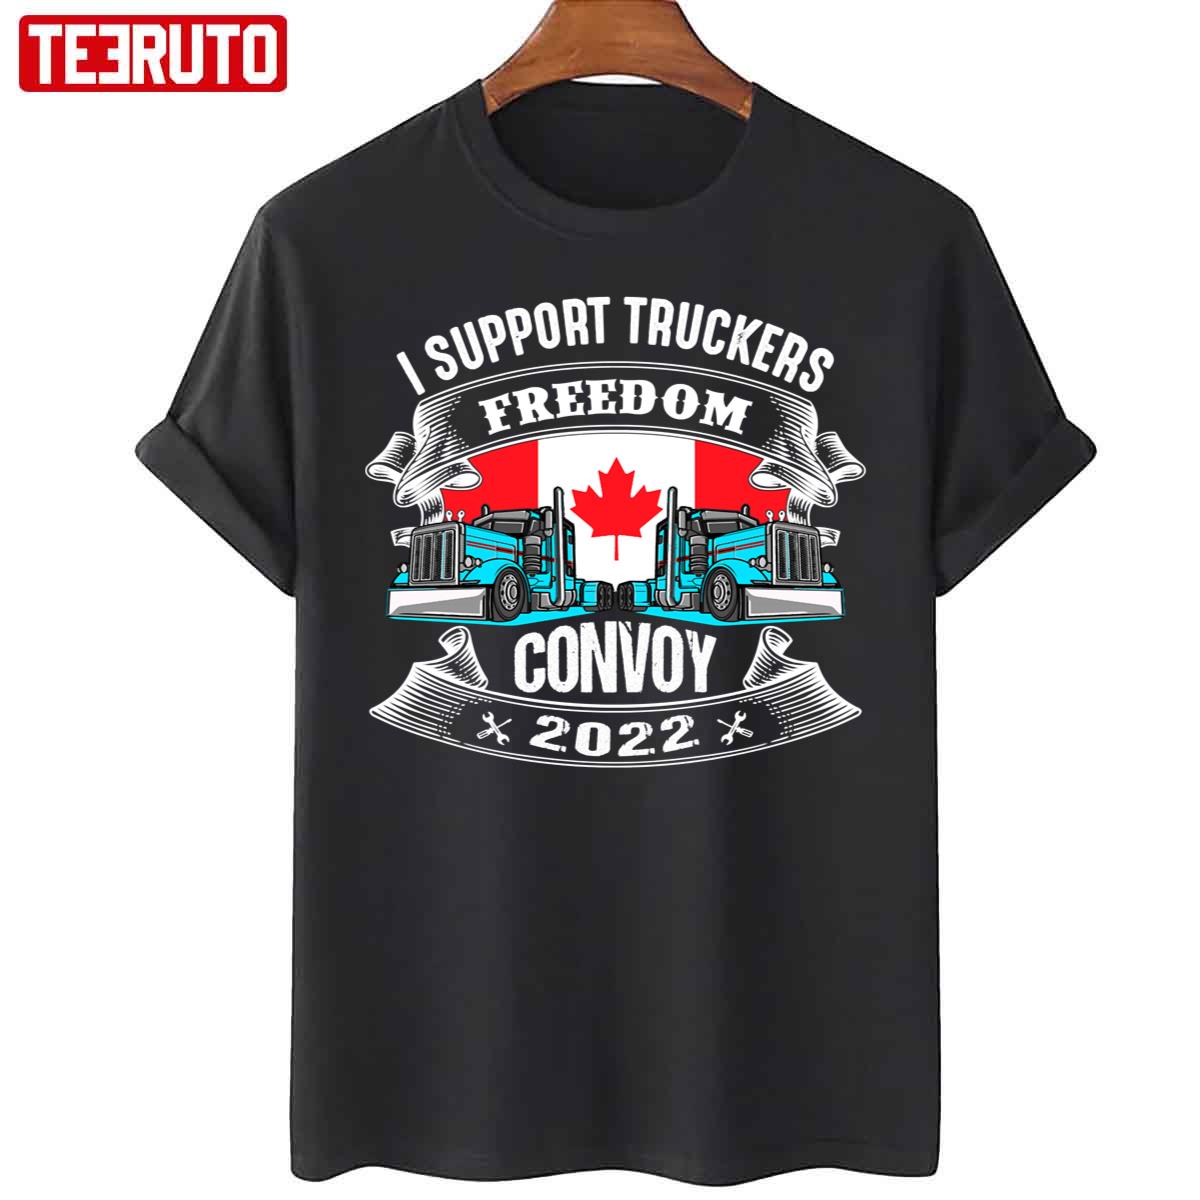 I Support Truckers Freedom Convoy 2022 Unisex T-Shirt